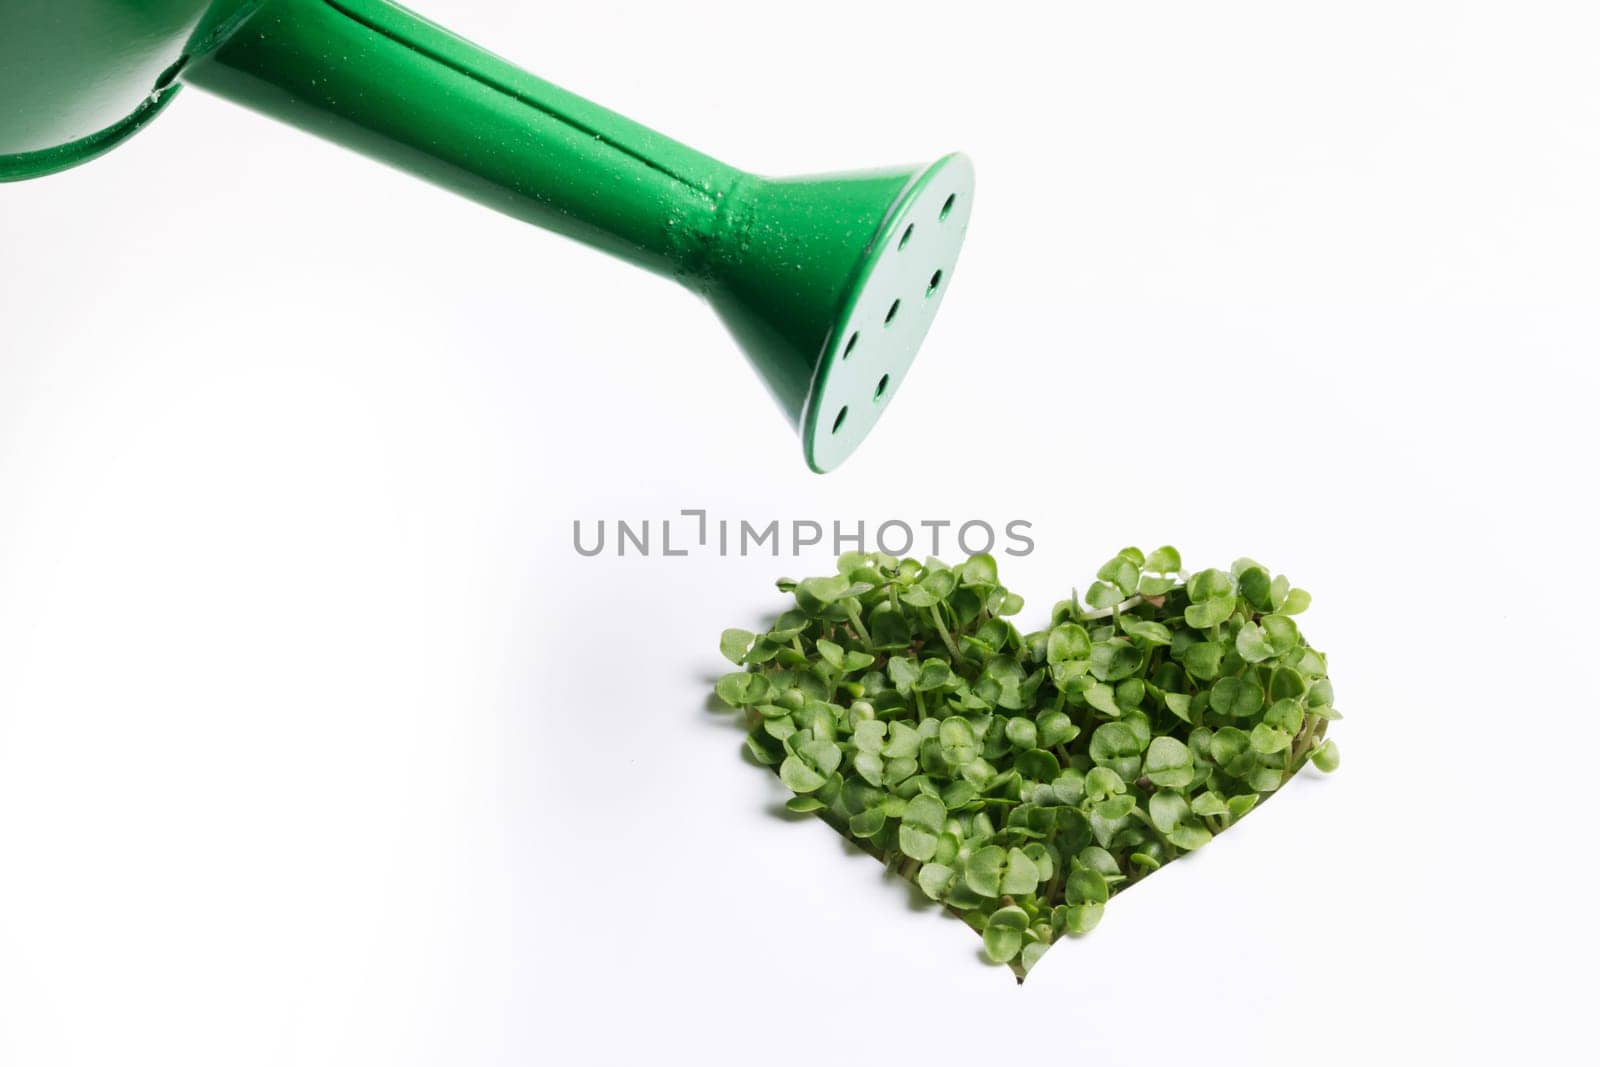 Watering can and sprout green plants growing a heart shape isolated on white background